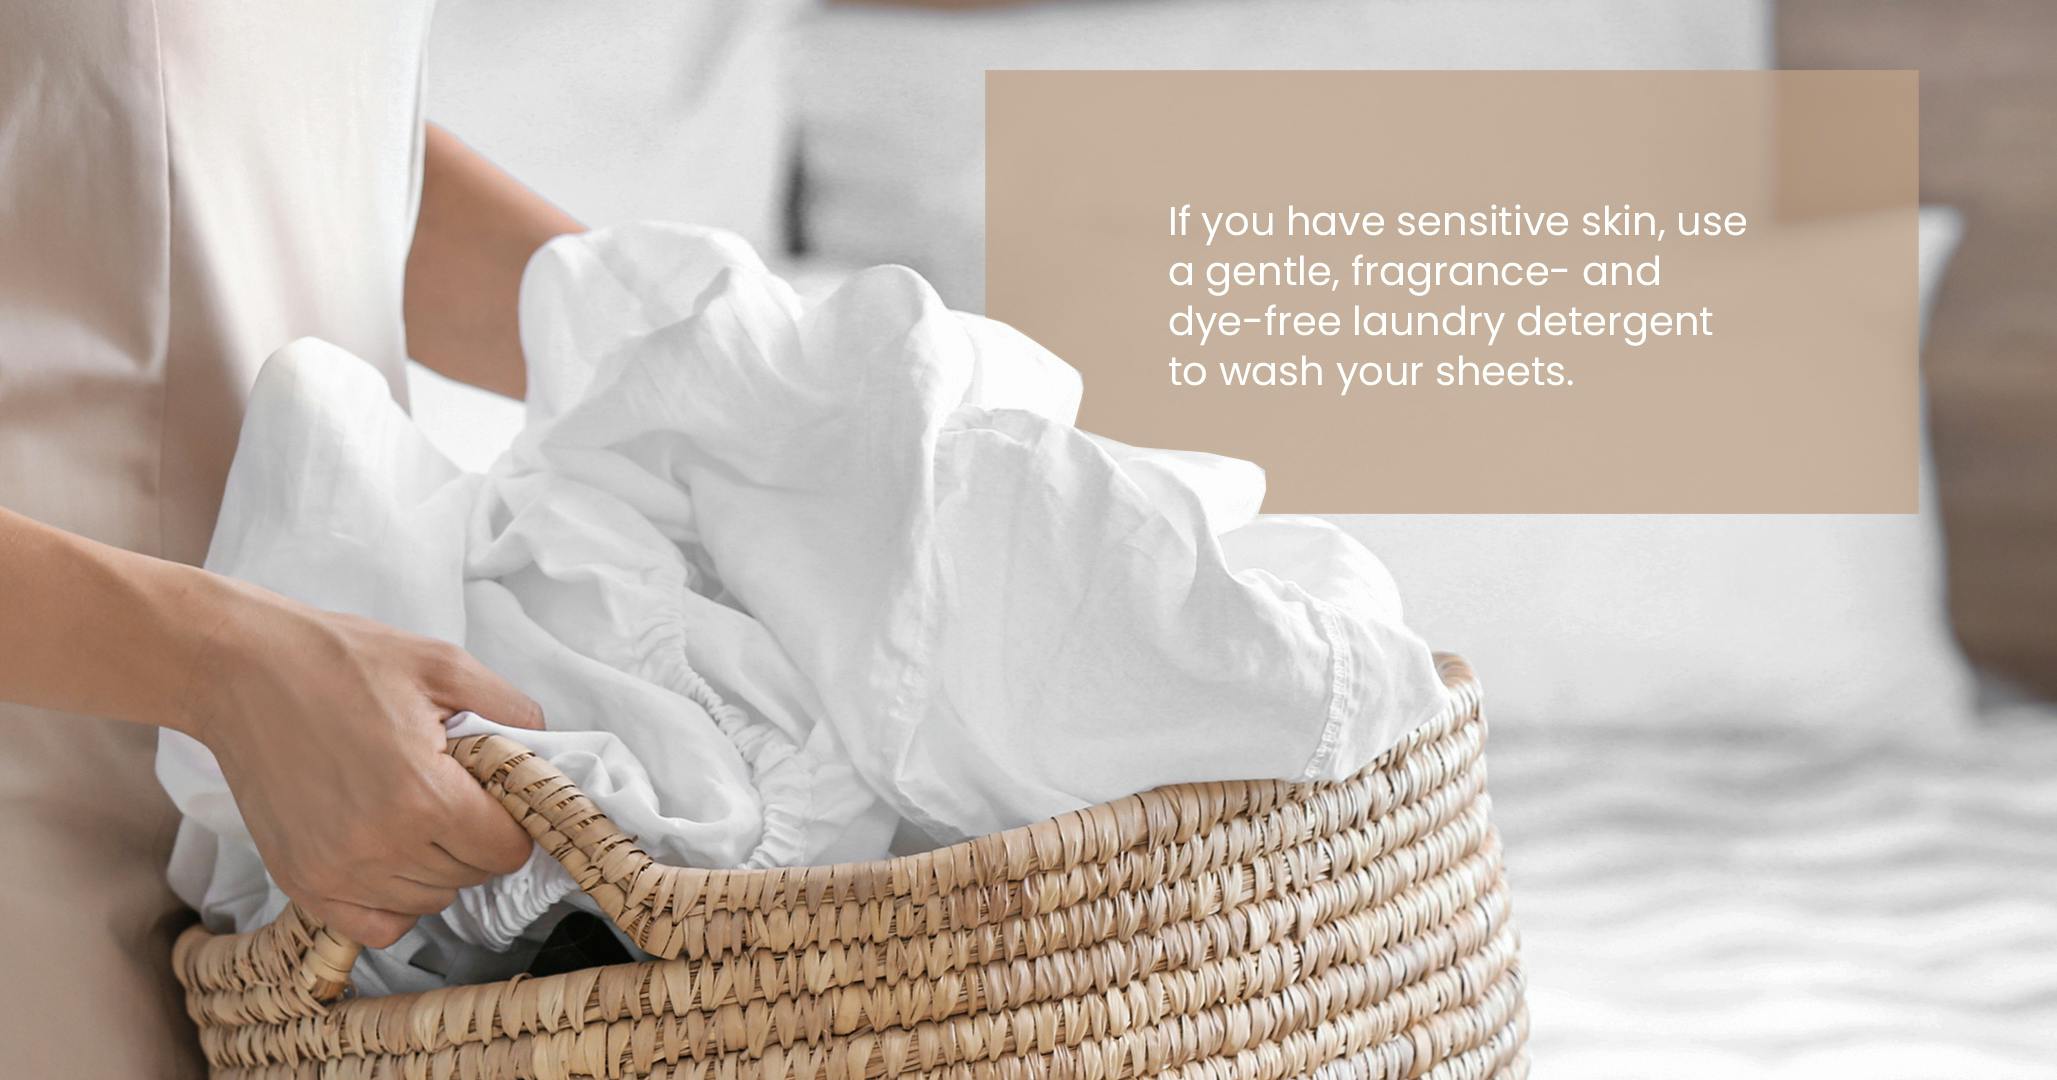 person holding laundry basket of sheets with description of how to wash sheets when you have sensitive skin